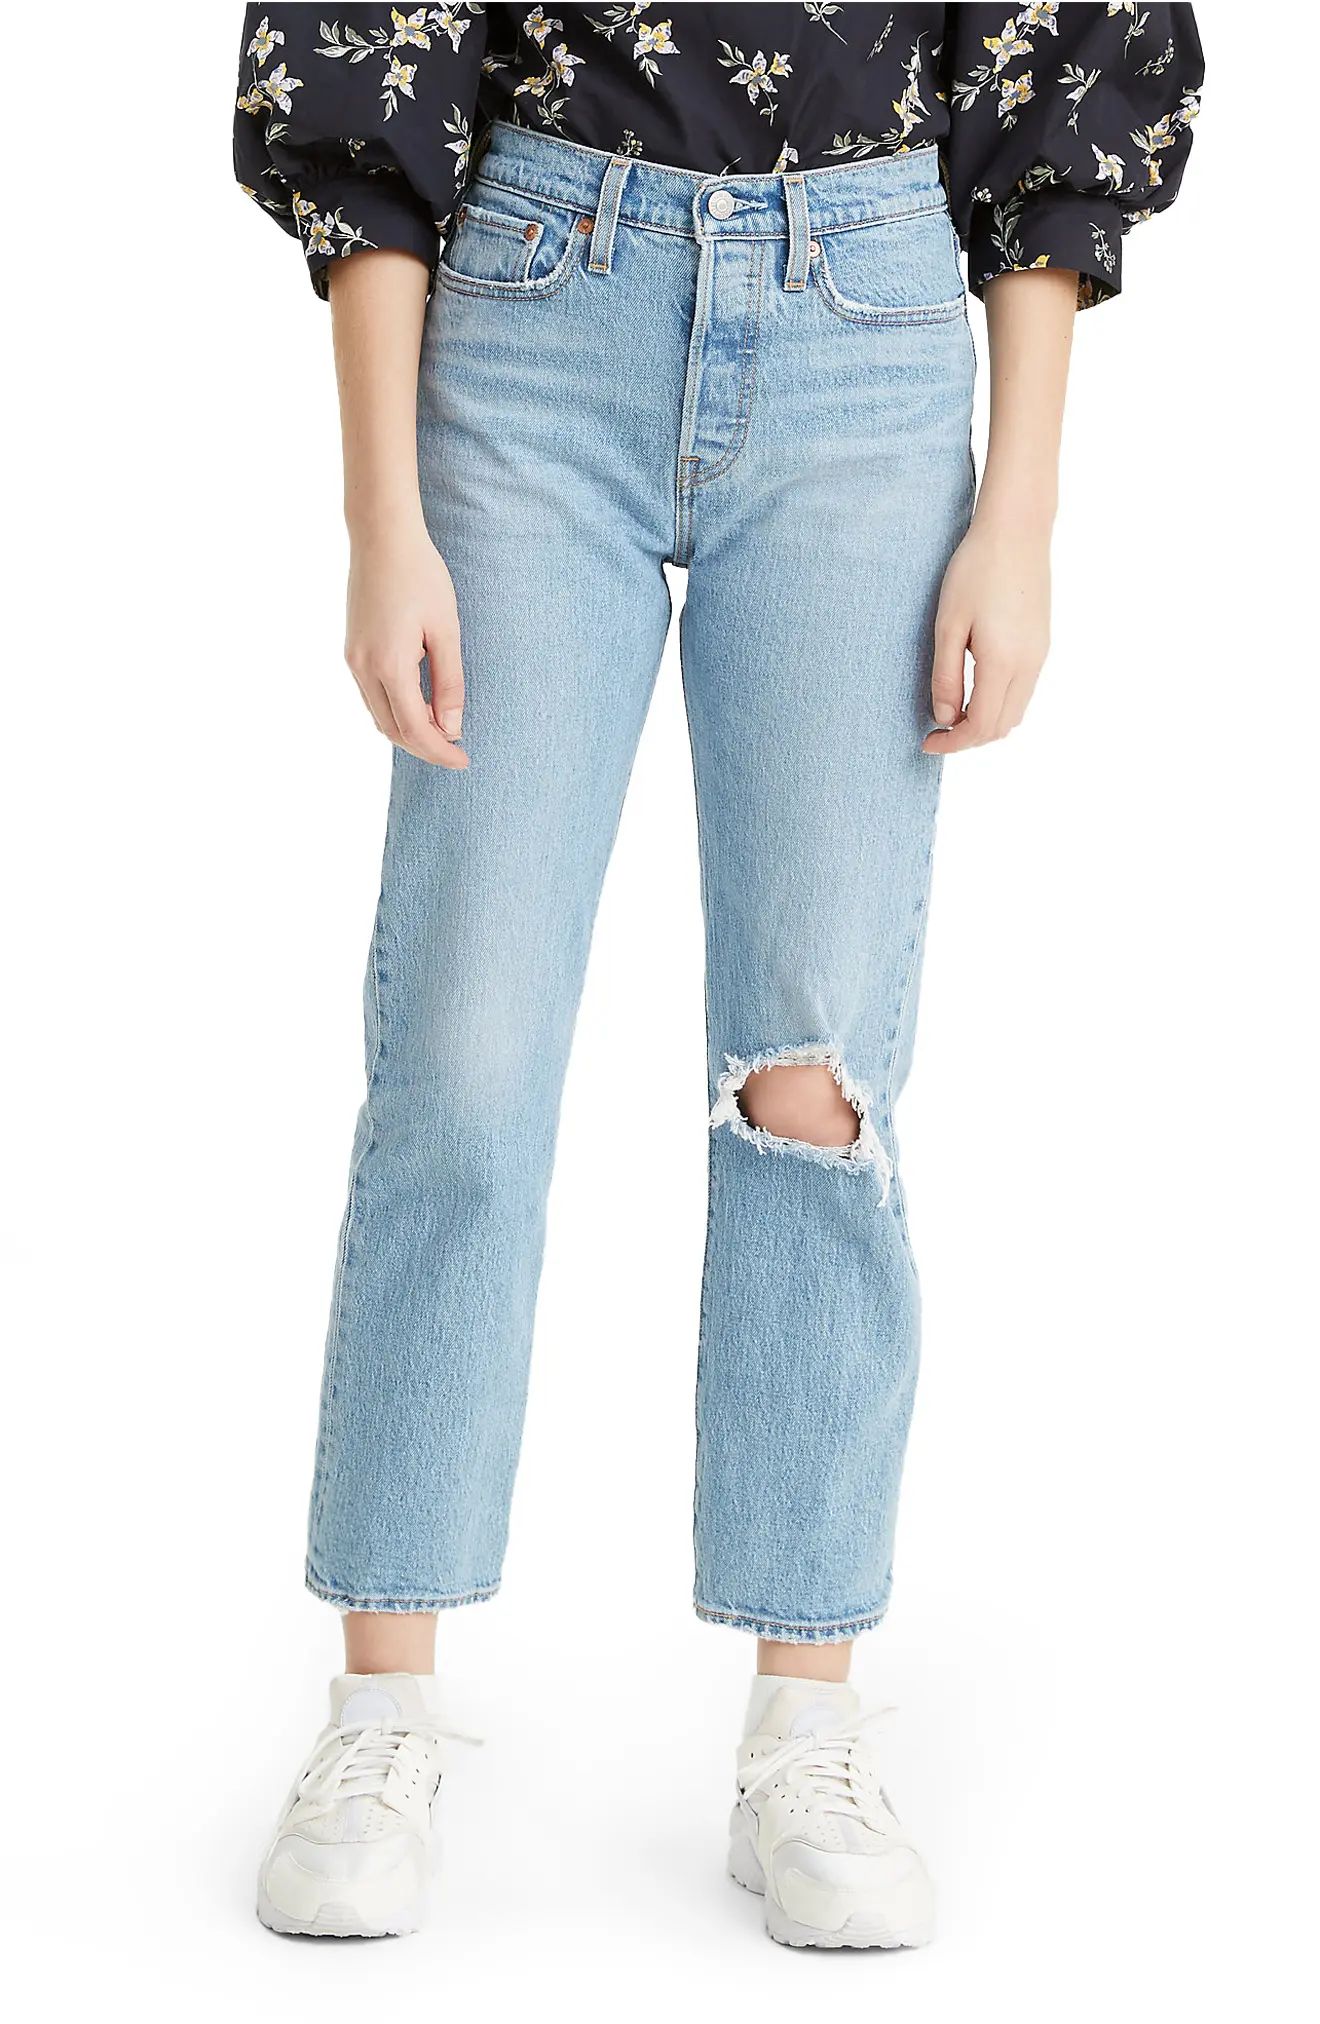 Women's Levi'S Wedgie Ripped High Waist Jeans, Size 24 x 28 - Blue | Nordstrom